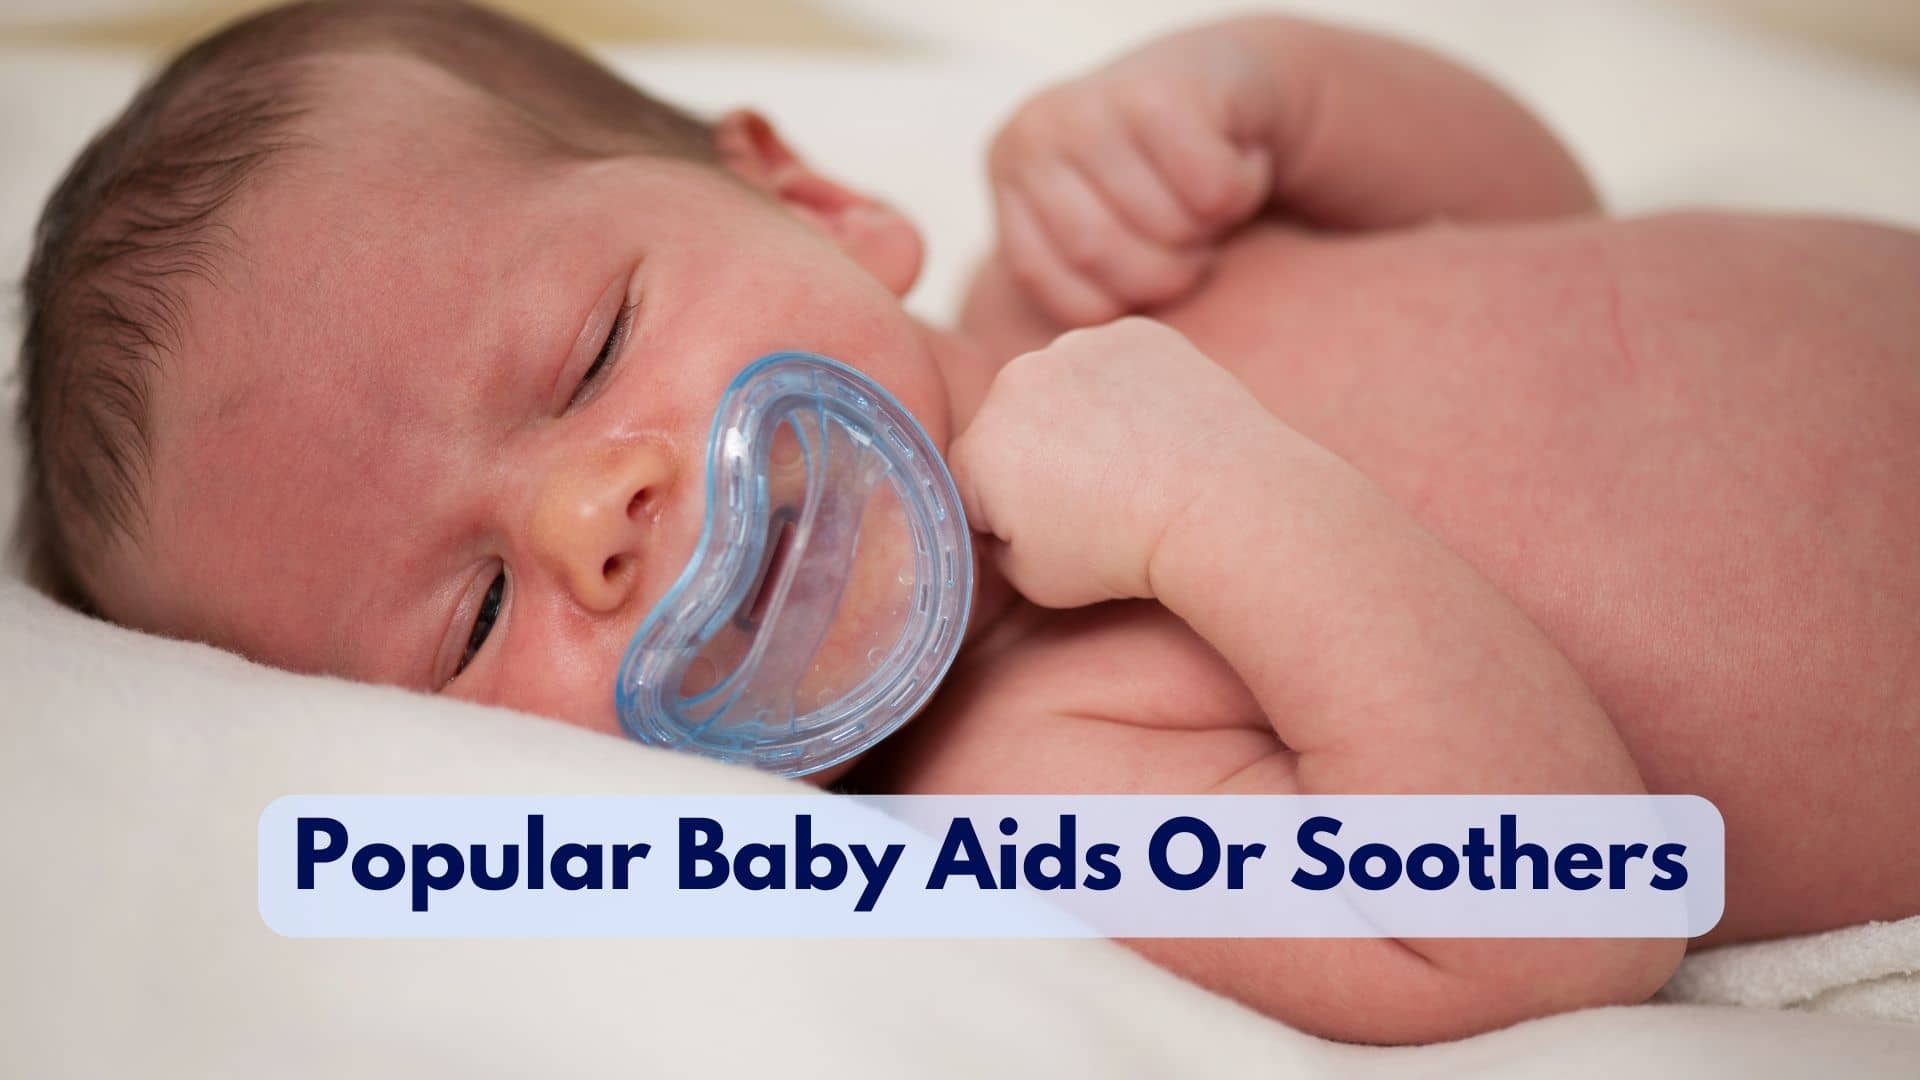 What Are Some Popular Baby Sleep Aids Or Soothers?